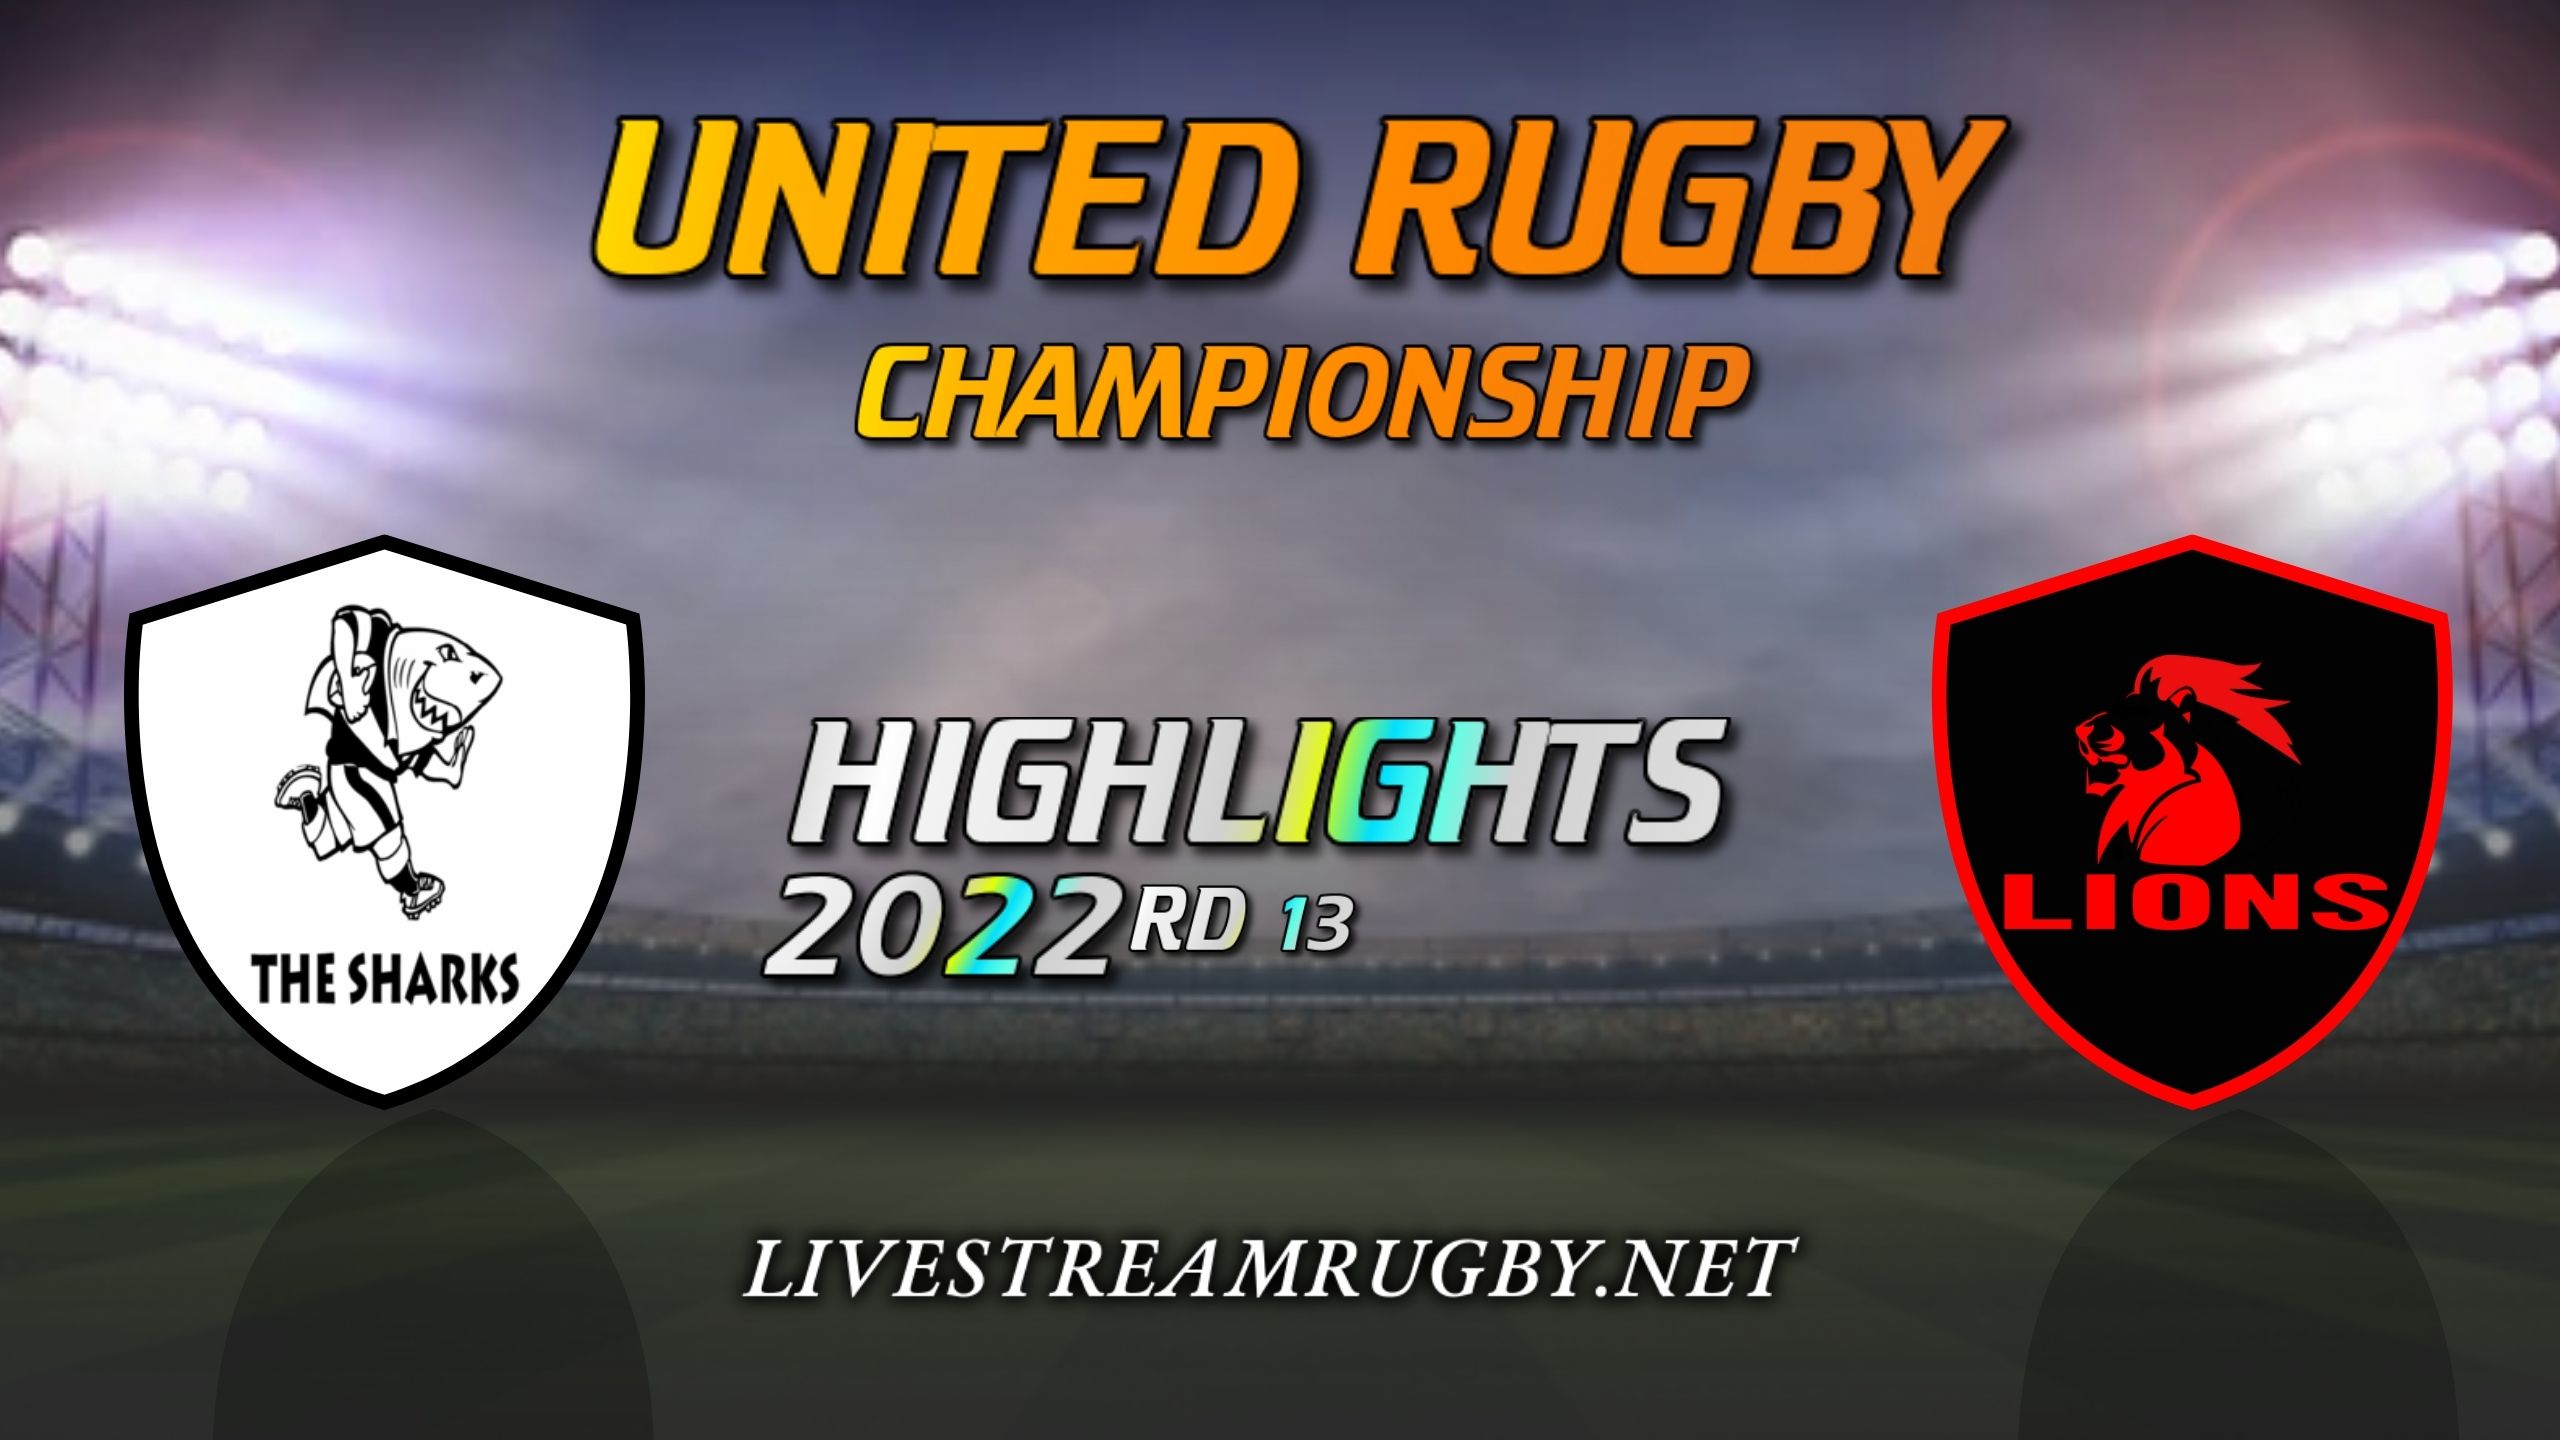 Sharks Vs Lions Highlights 2022 Rd 13 United Rugby